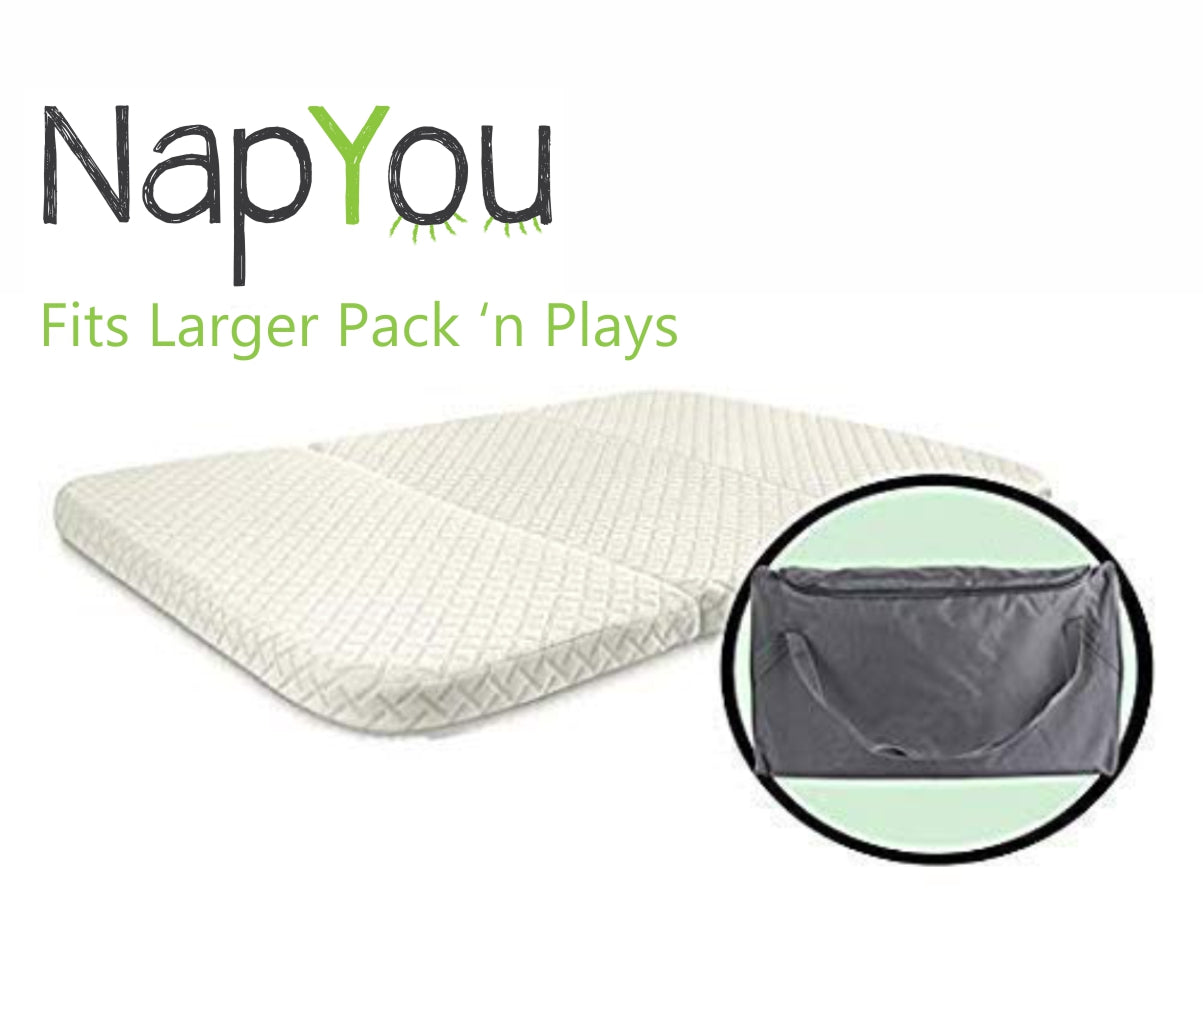 size of pack and play mattress